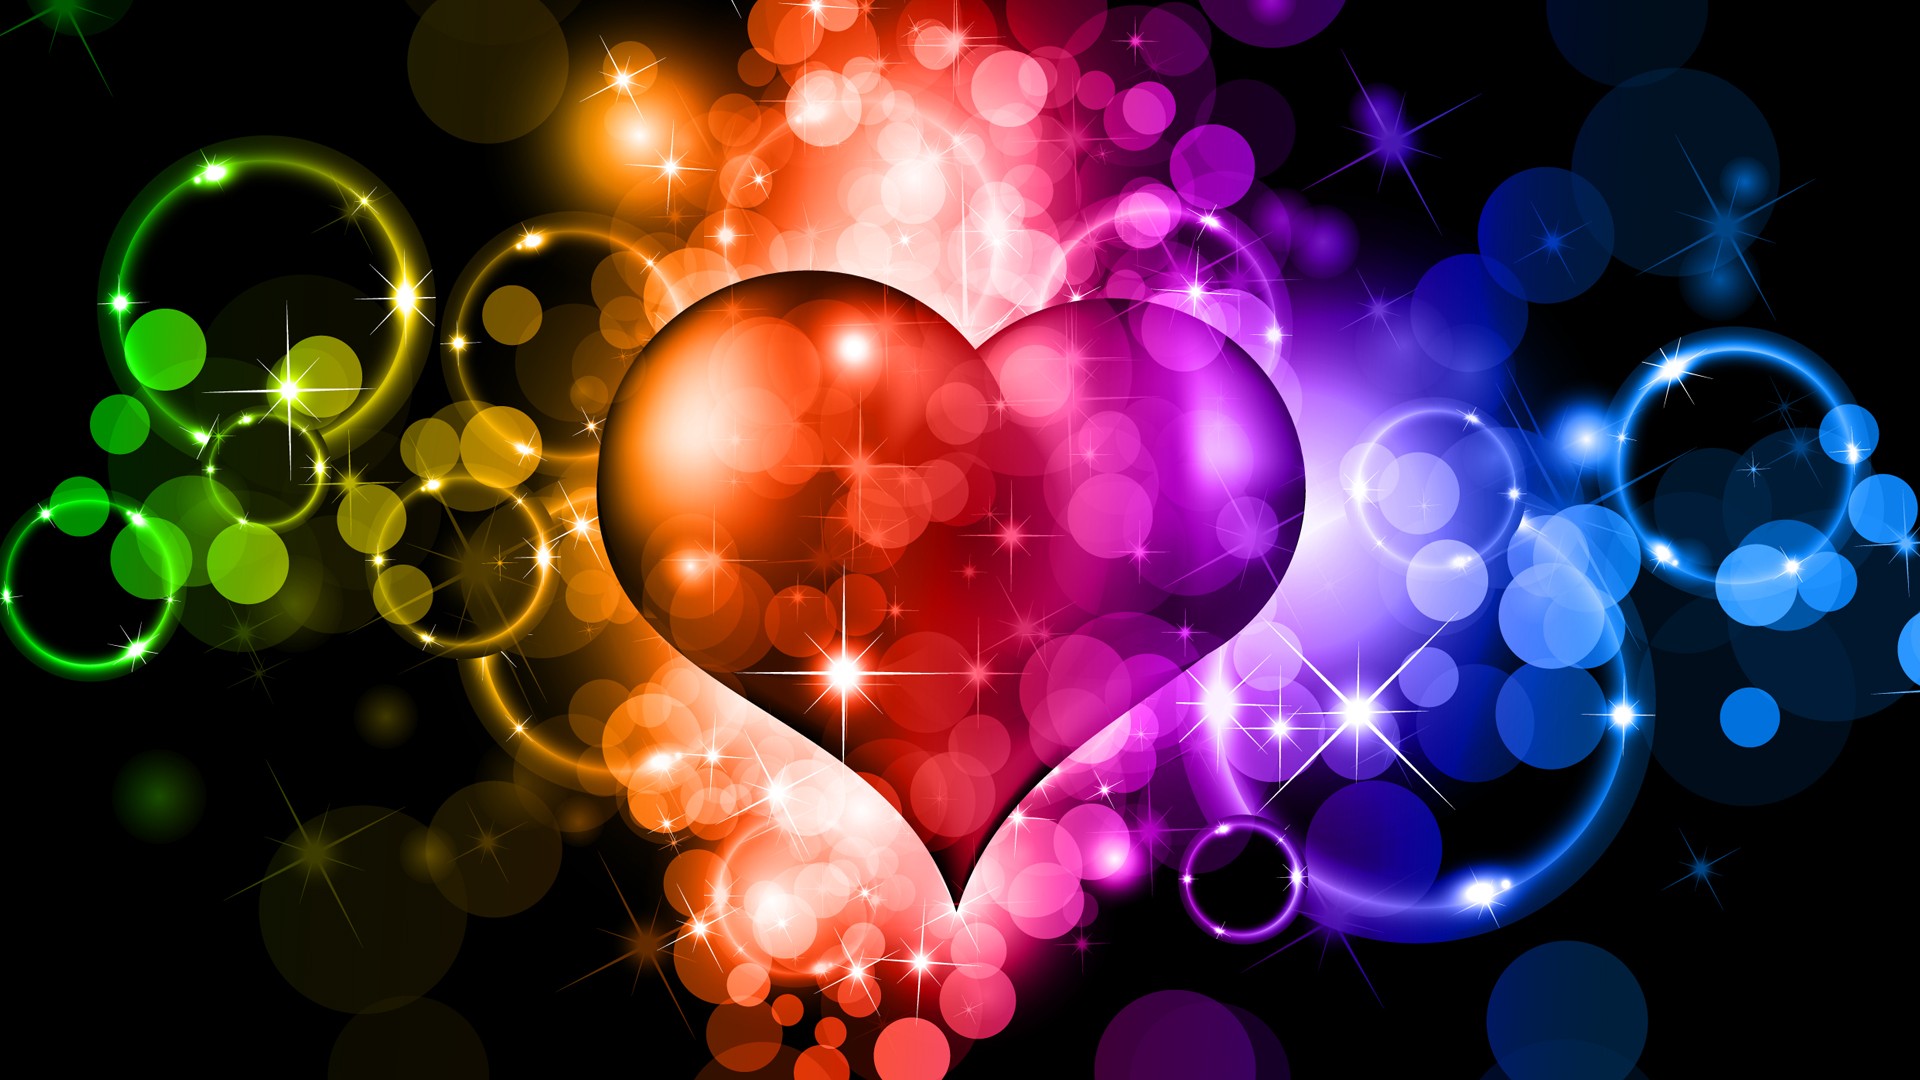 heart, Heart shaped, Colorful, Graphic design Wallpaper